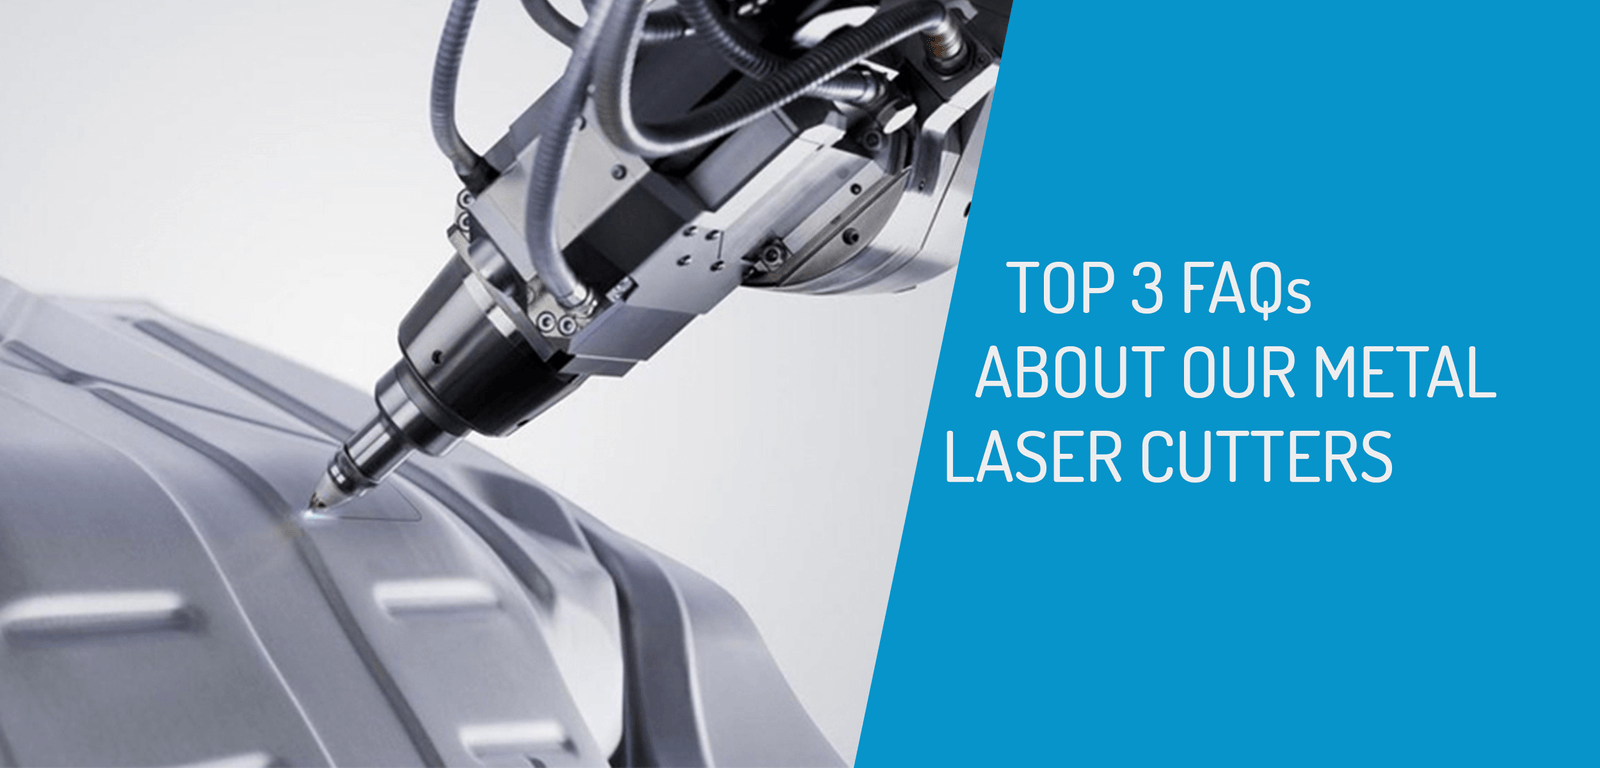 Top Three FAQ About Our Metal Laser Cutter